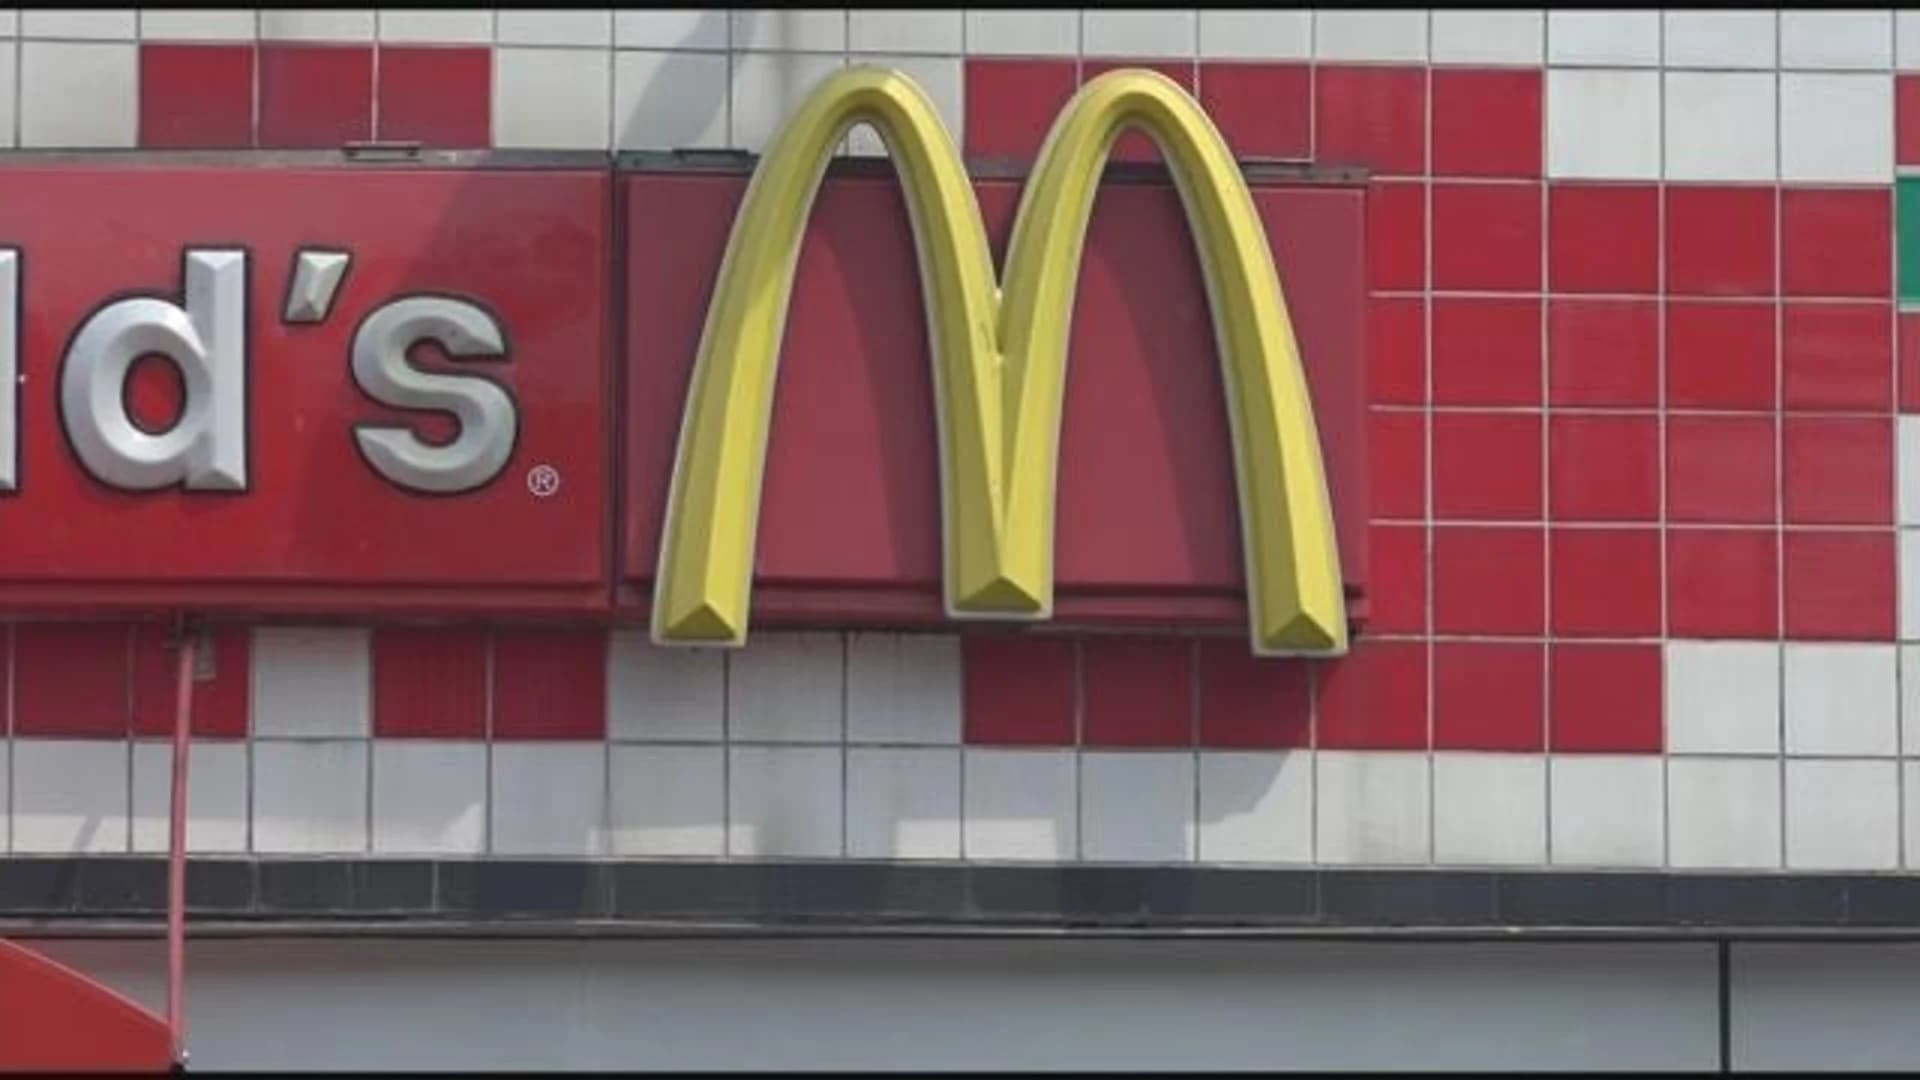 Tremont McDonald's reportedly used as hot spot for drug sales